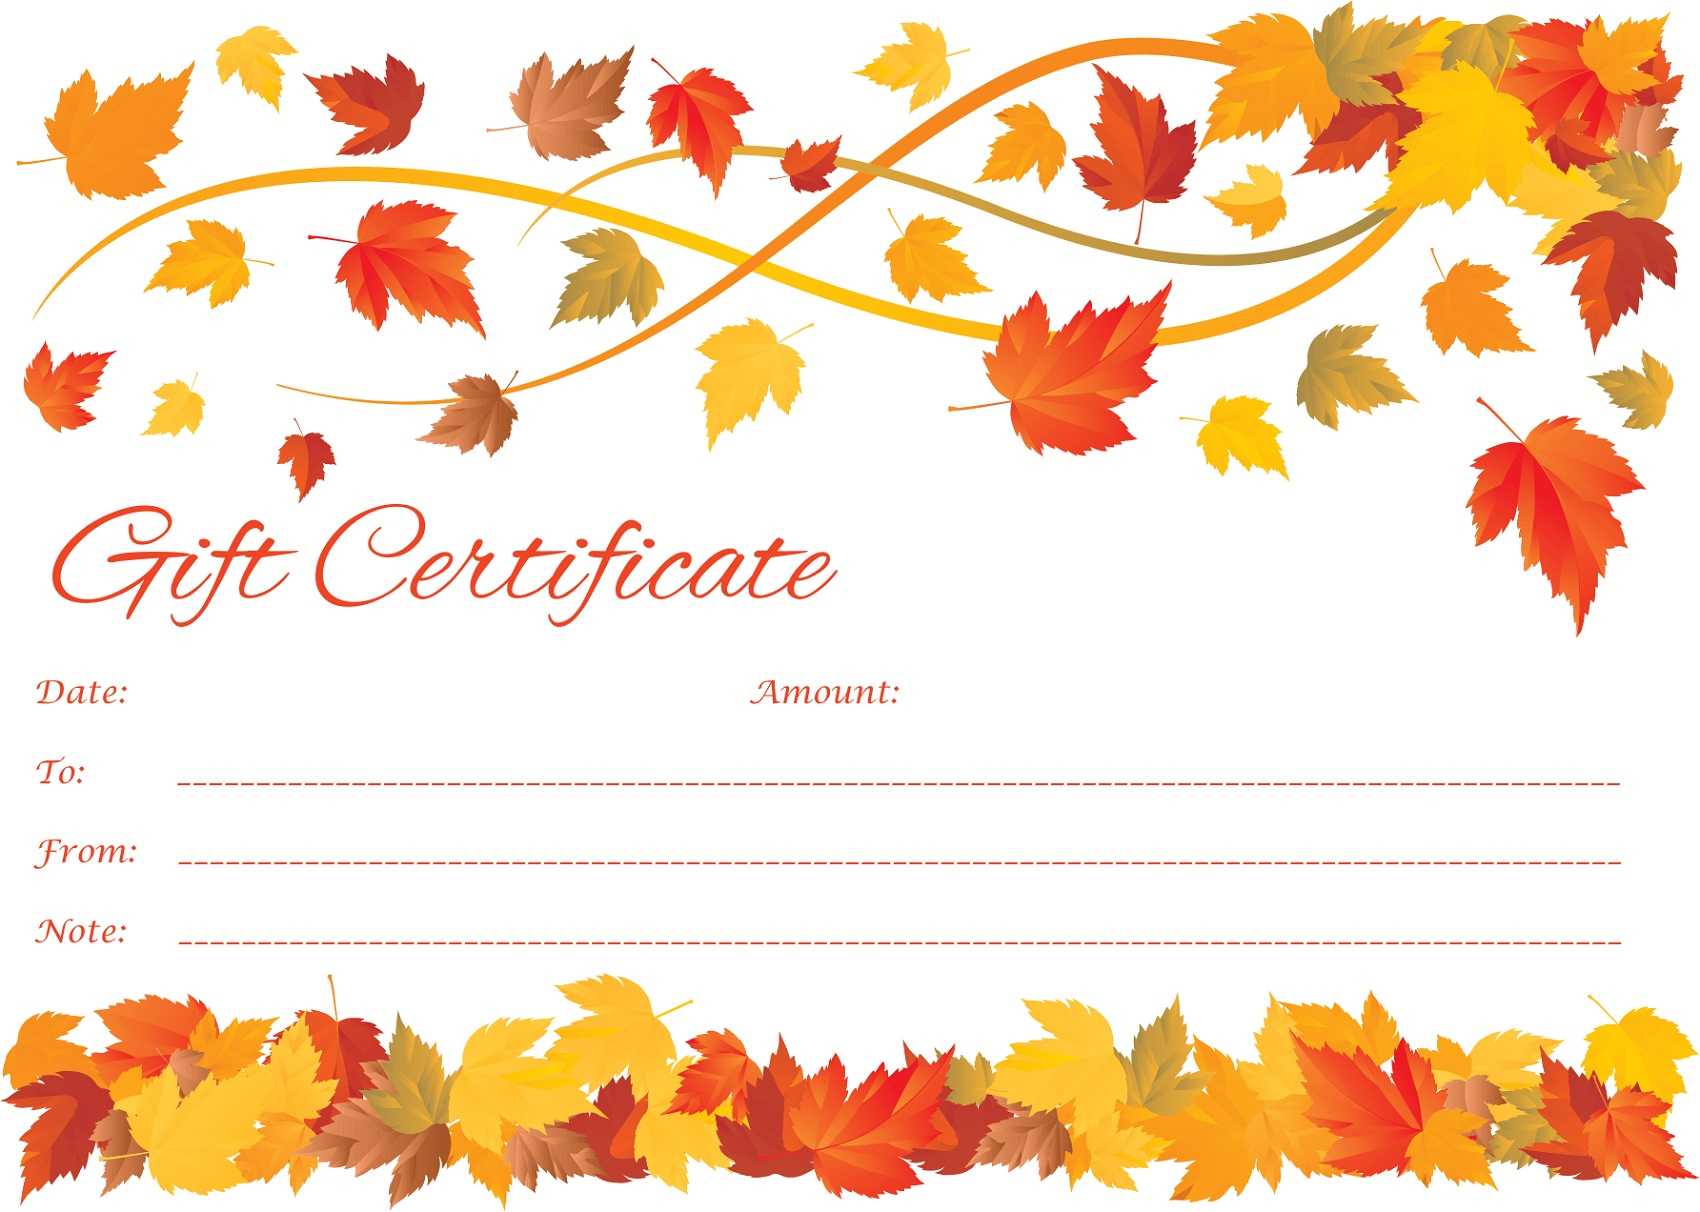 Gift Certificate Templates To Print For Free | 101 Activity Throughout Kids Gift Certificate Template